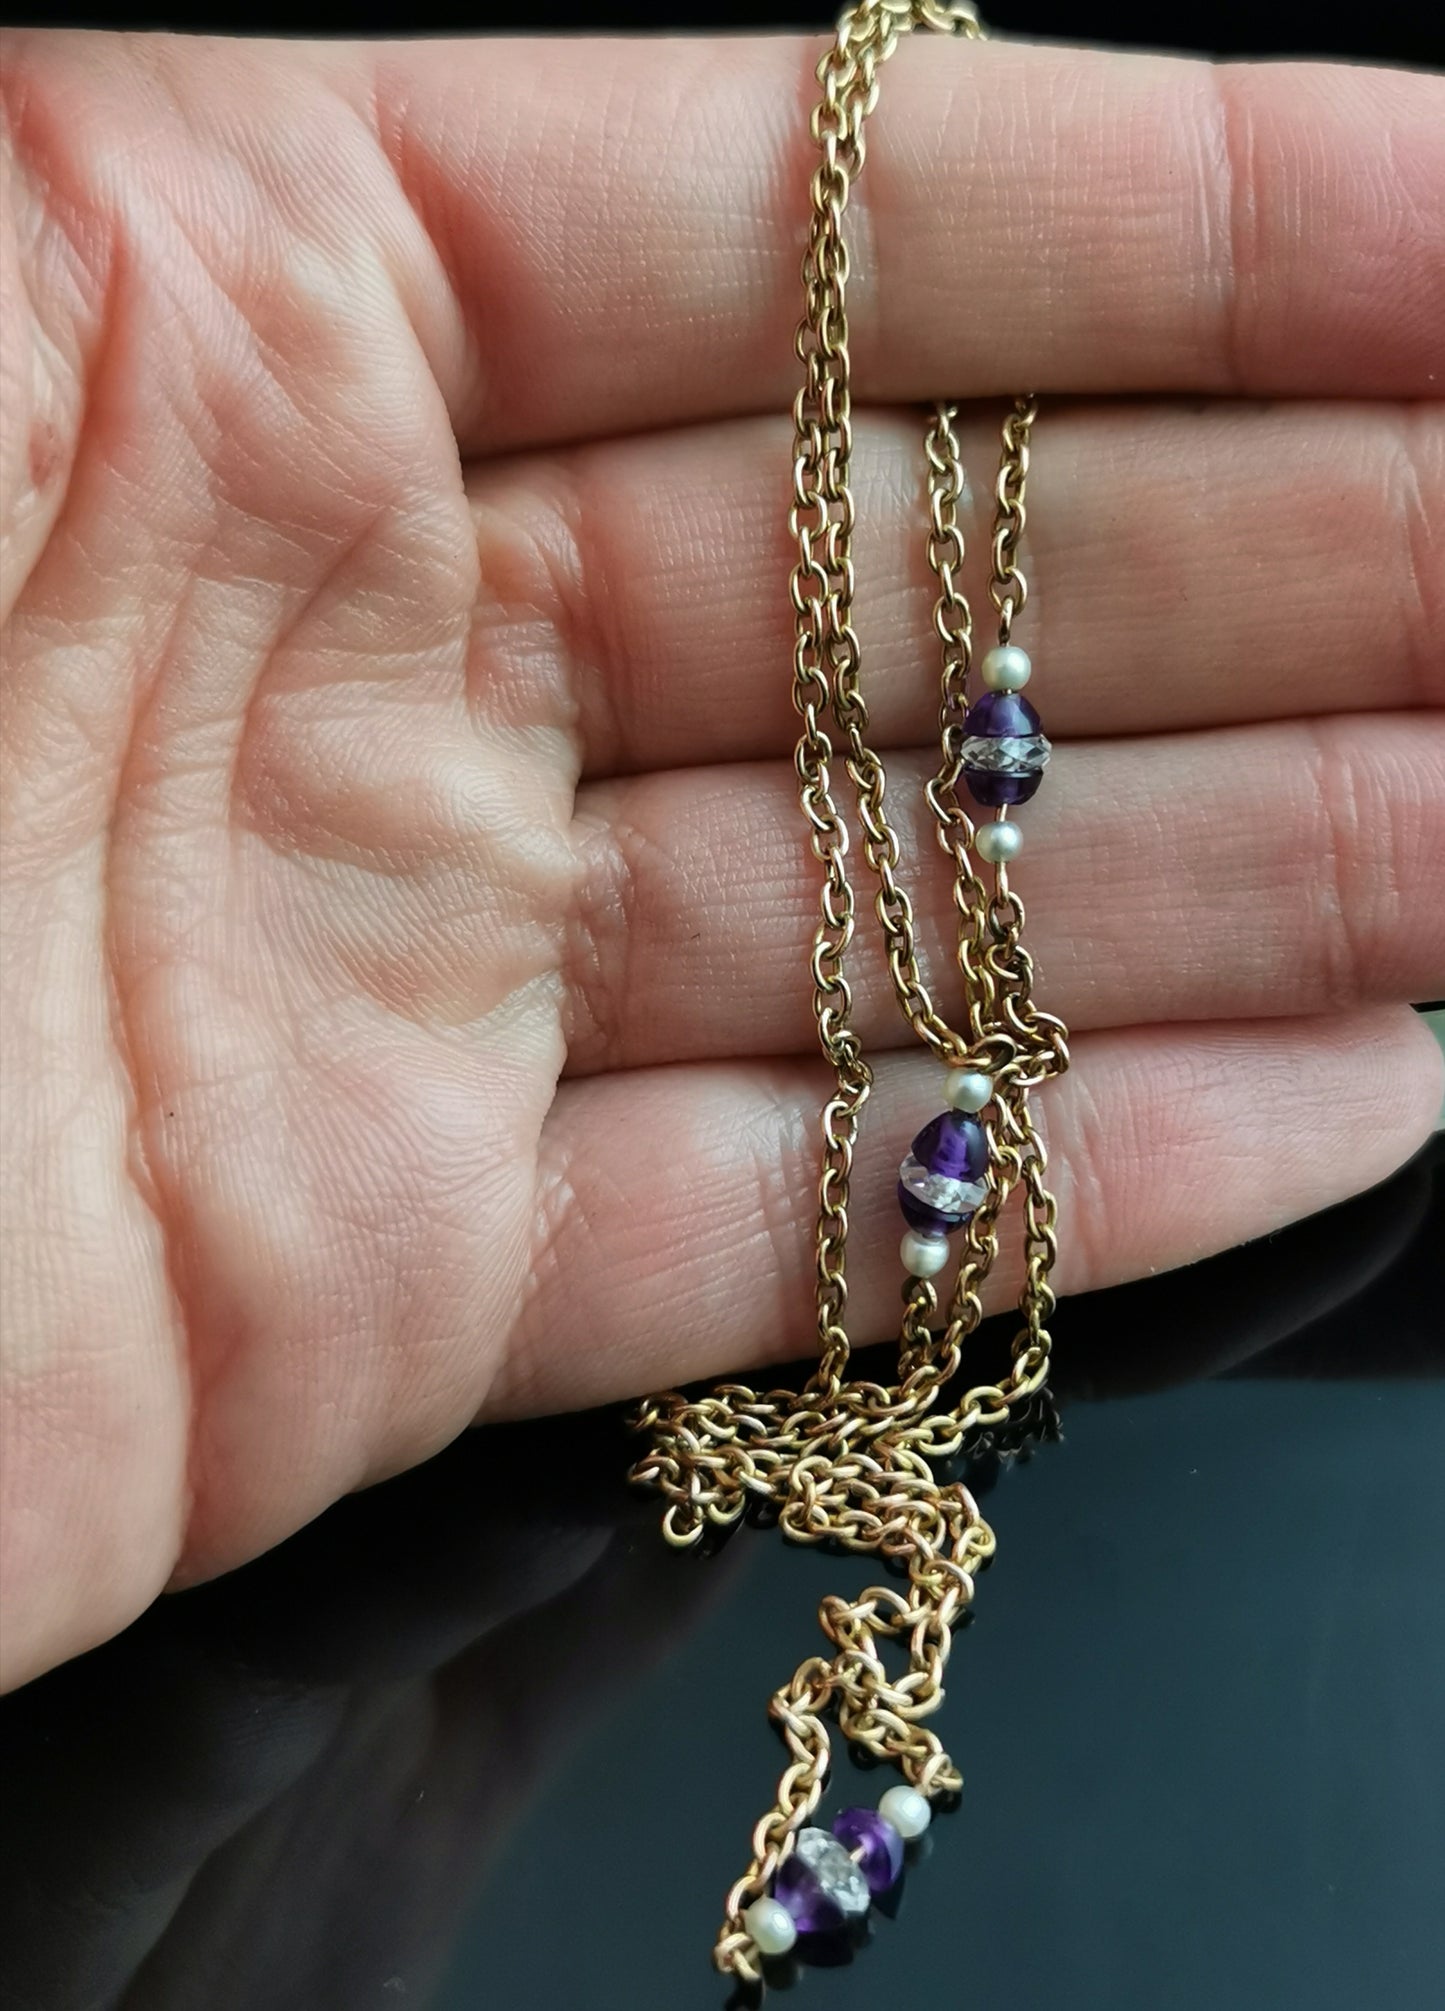 Vintage Art Deco 9ct gold chain necklace, Amethyst, Rock crystal and seed pearl